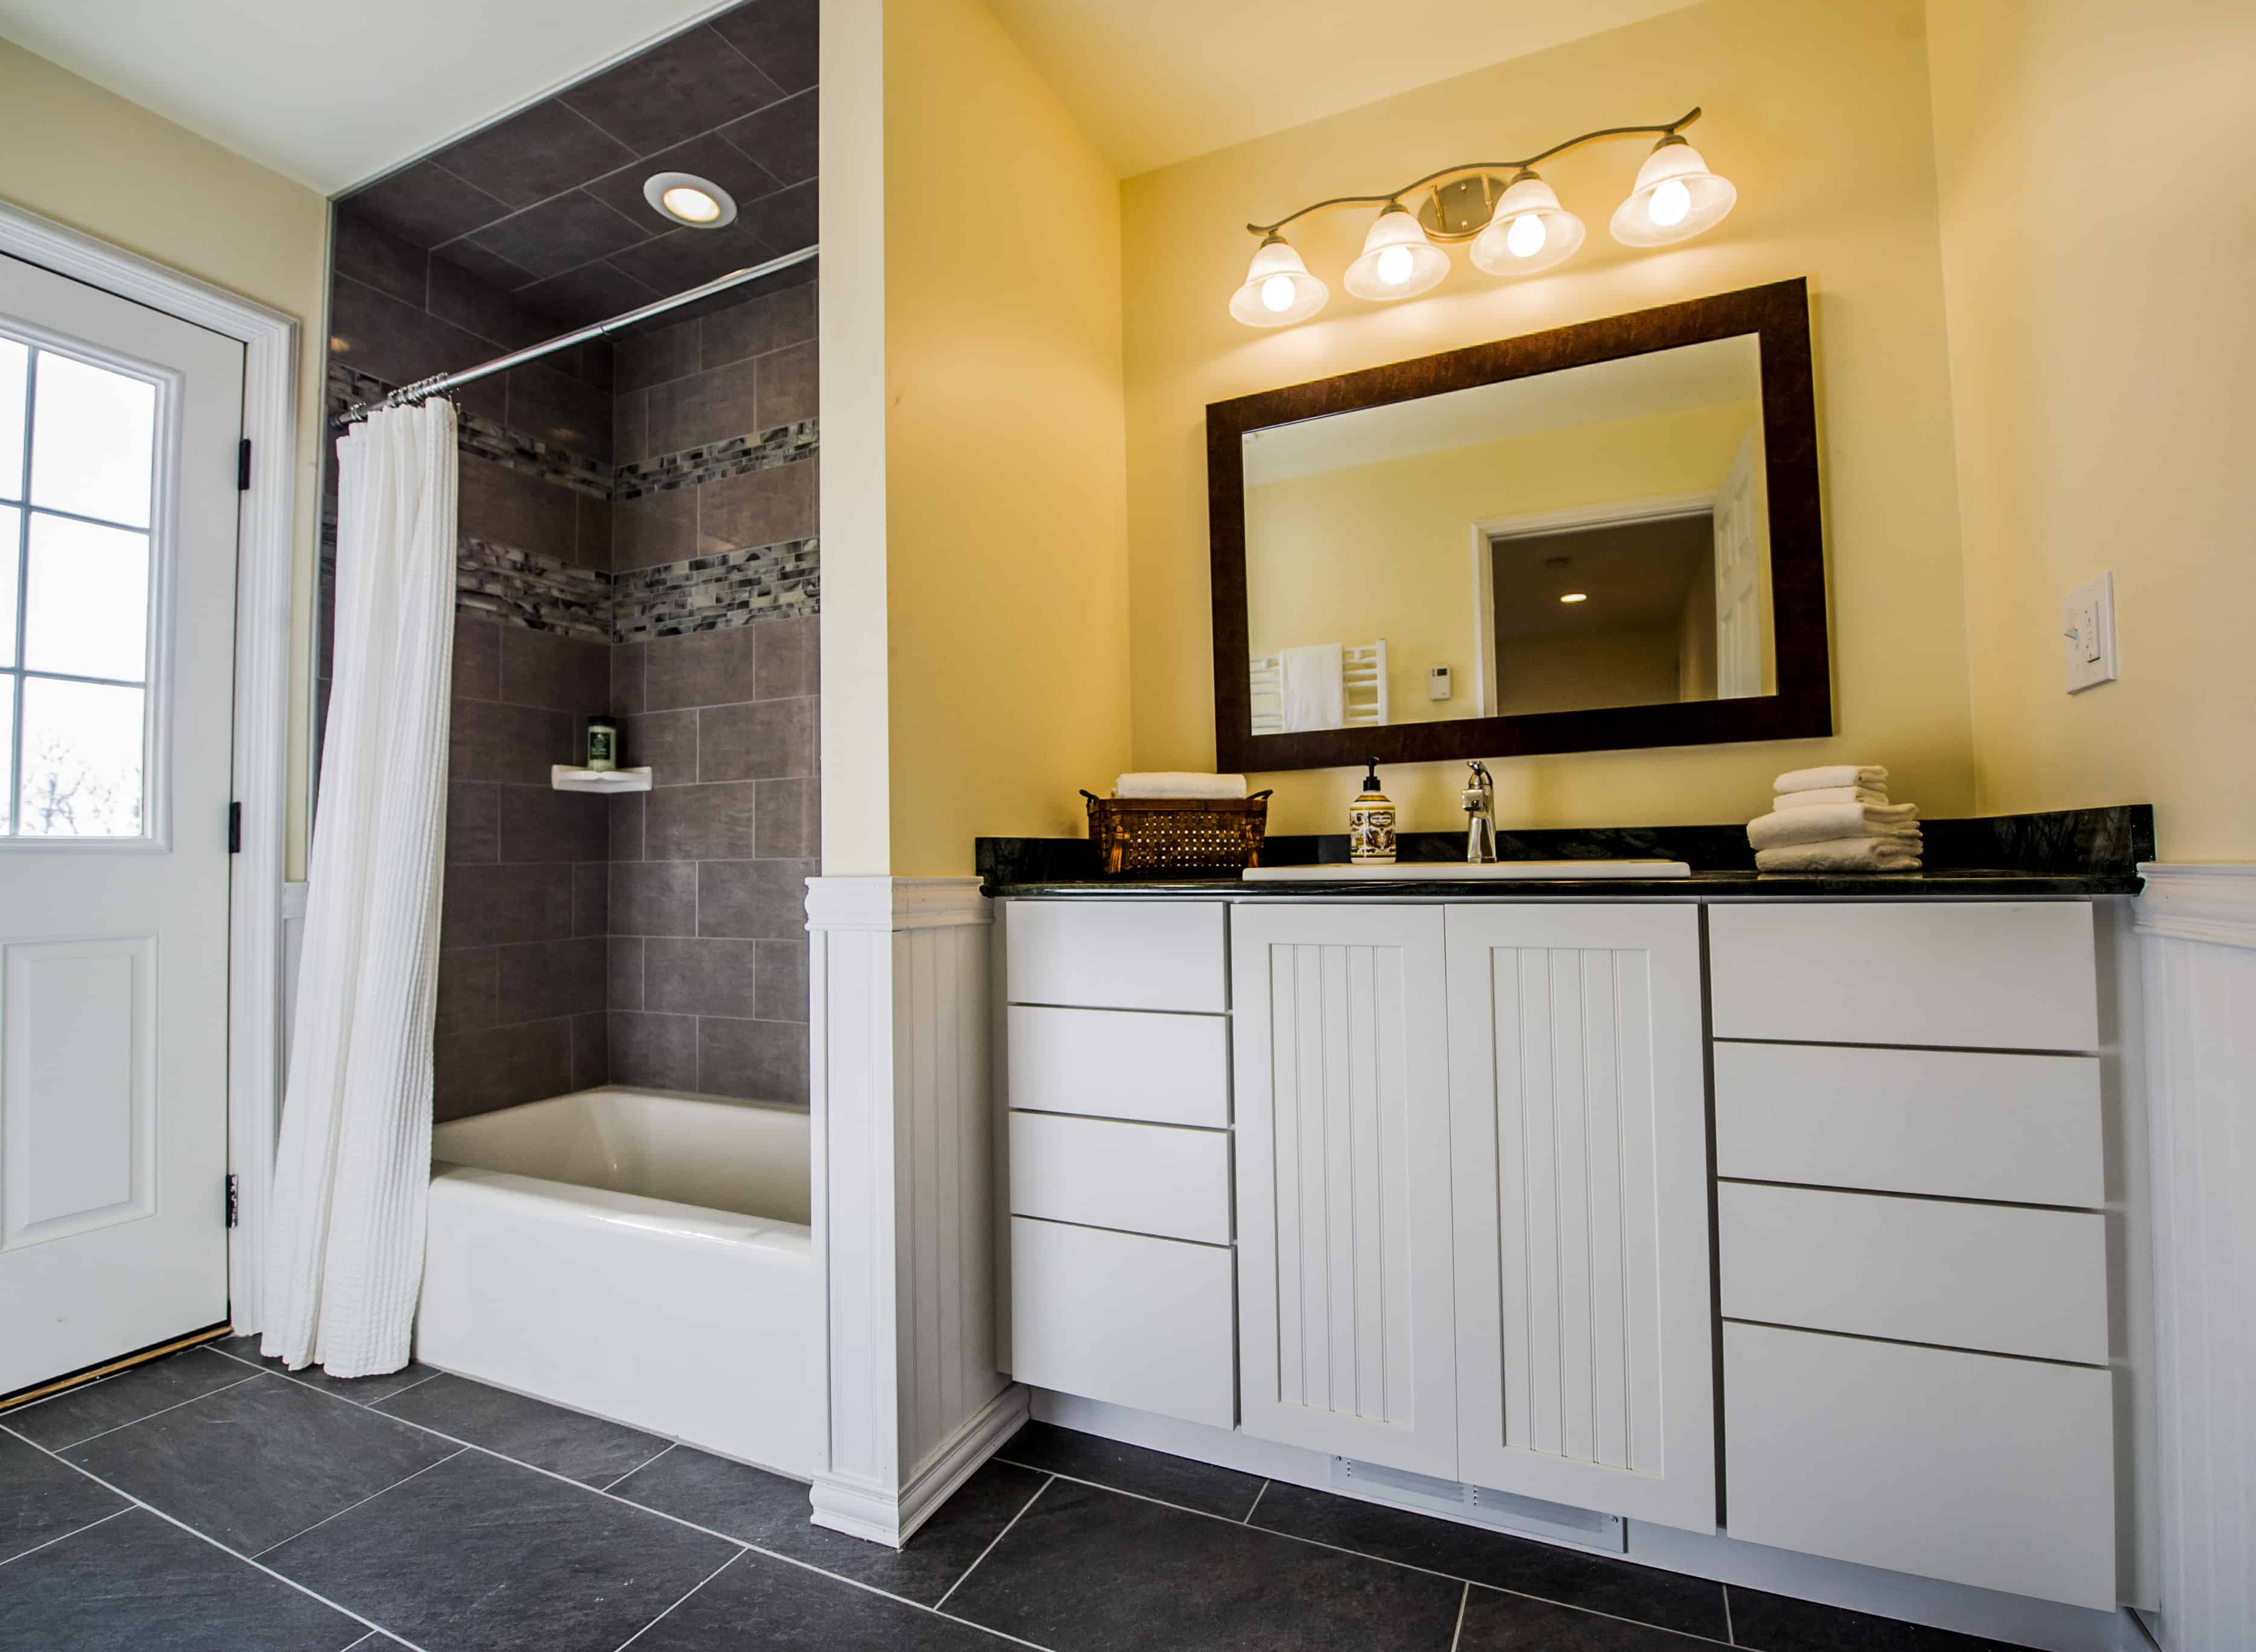 Brunswick Contractor completes Bathroom Remodel for Whole Home Renovation